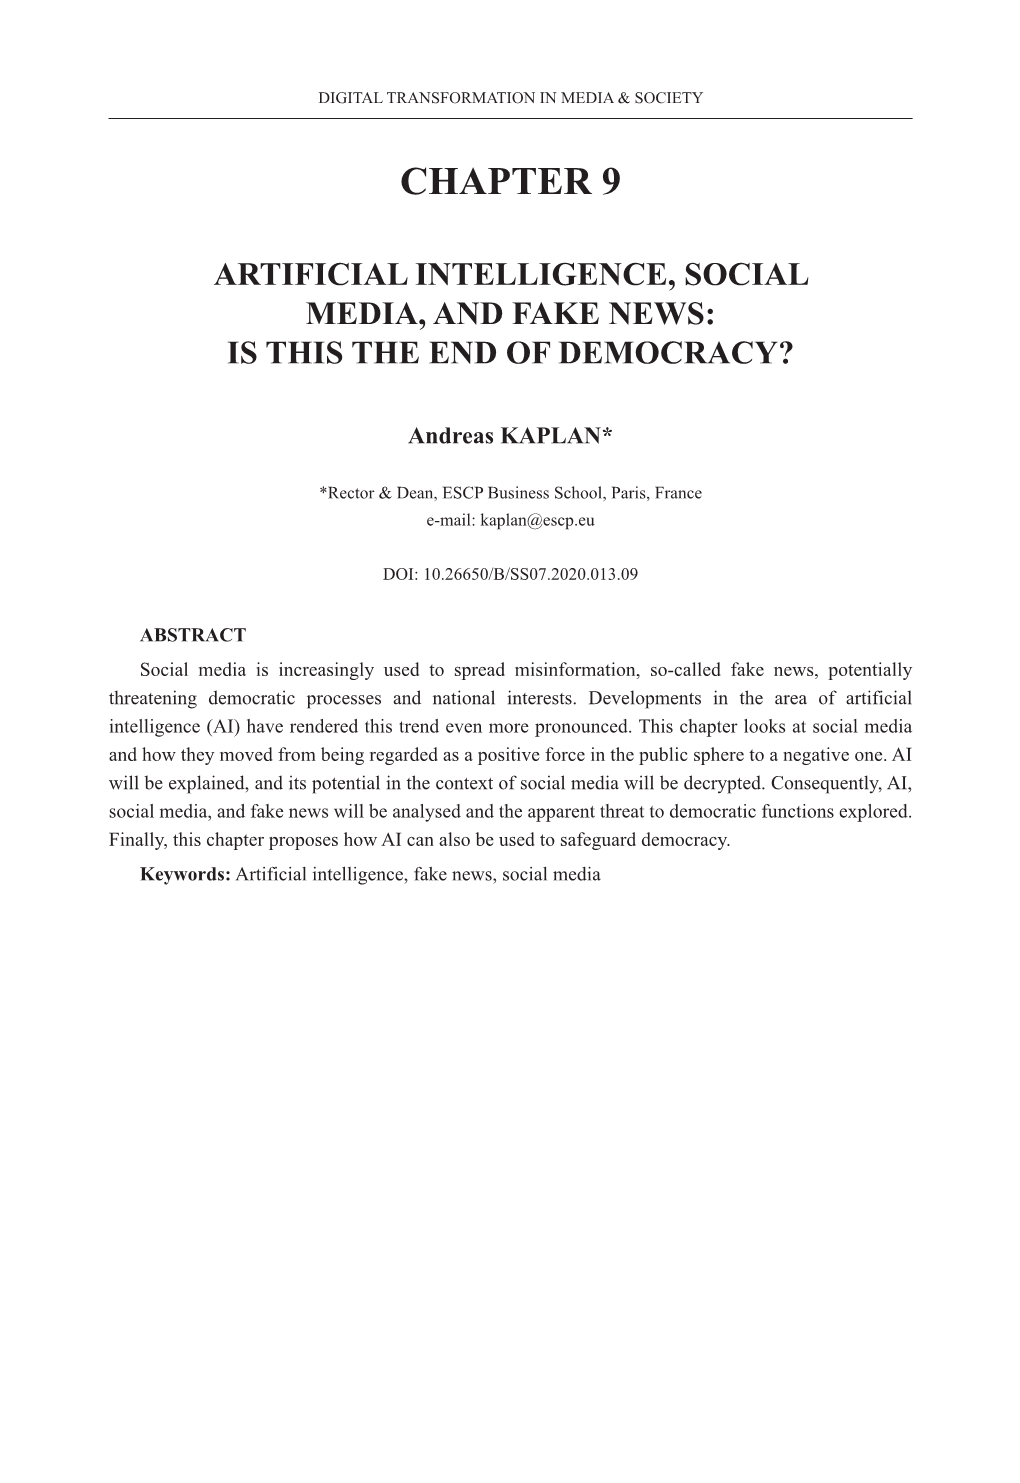 Chapter 9 Artificial Intelligence, Social Media, and Fake News